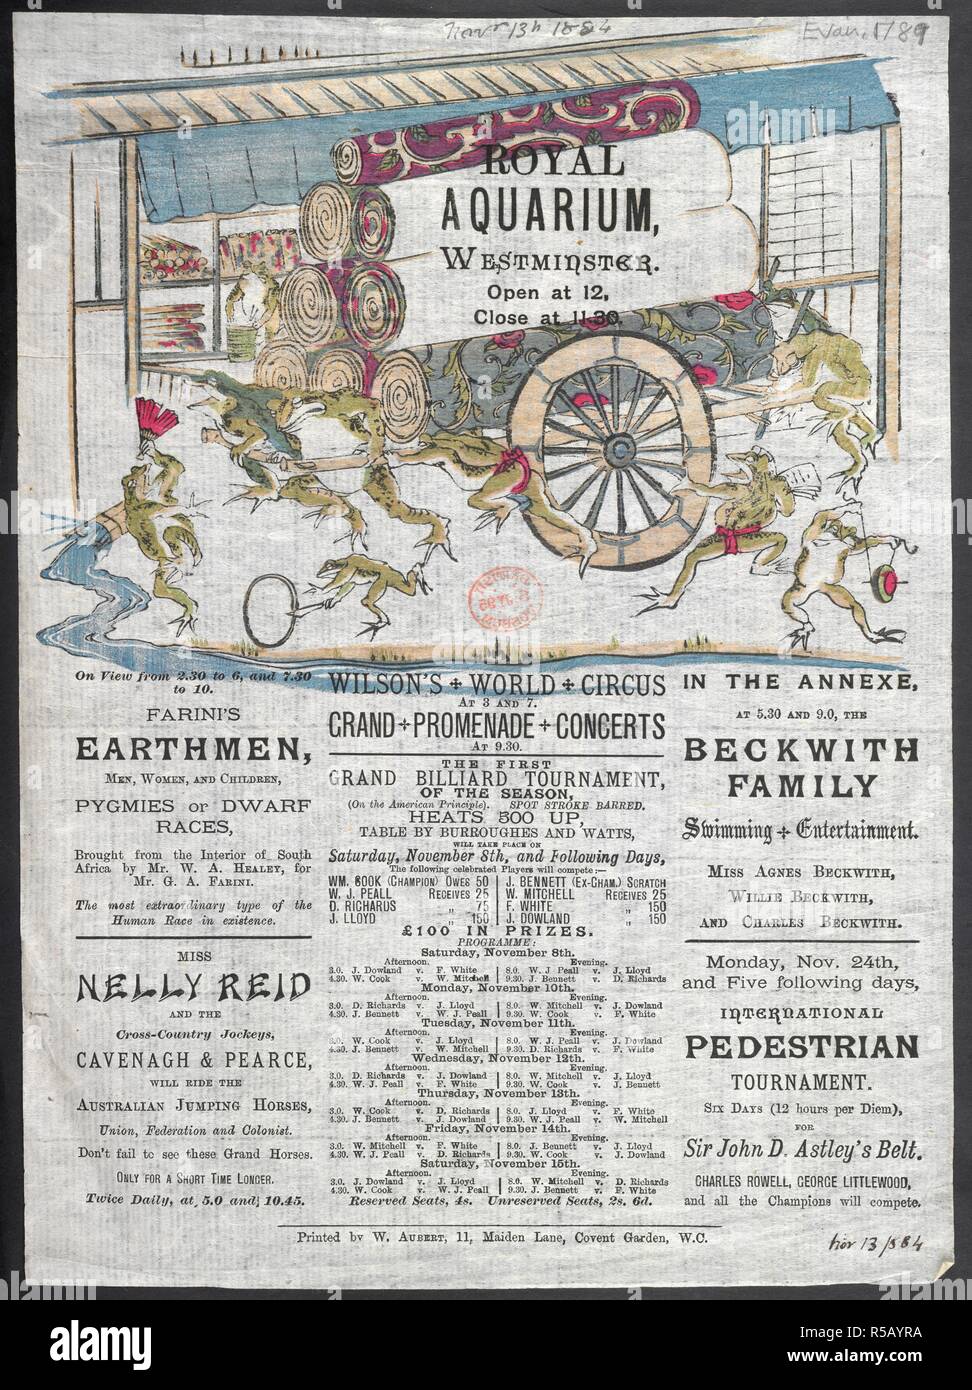 Royal Aquarium, Westminster. A collection of pamphlets, handbills, and miscella. 1884. Royal Aquarium, Westminster Farinis earthmen Miss Nelly Reid, Wilsons World Circus Notice. 33 cm.  Image taken from A collection of pamphlets, handbills, and miscellaneous printed matter relating to Victorian entertainment and everyday life.  Originally published/produced in 1884. . Source: EVAN.1789,. Language: English. Stock Photo